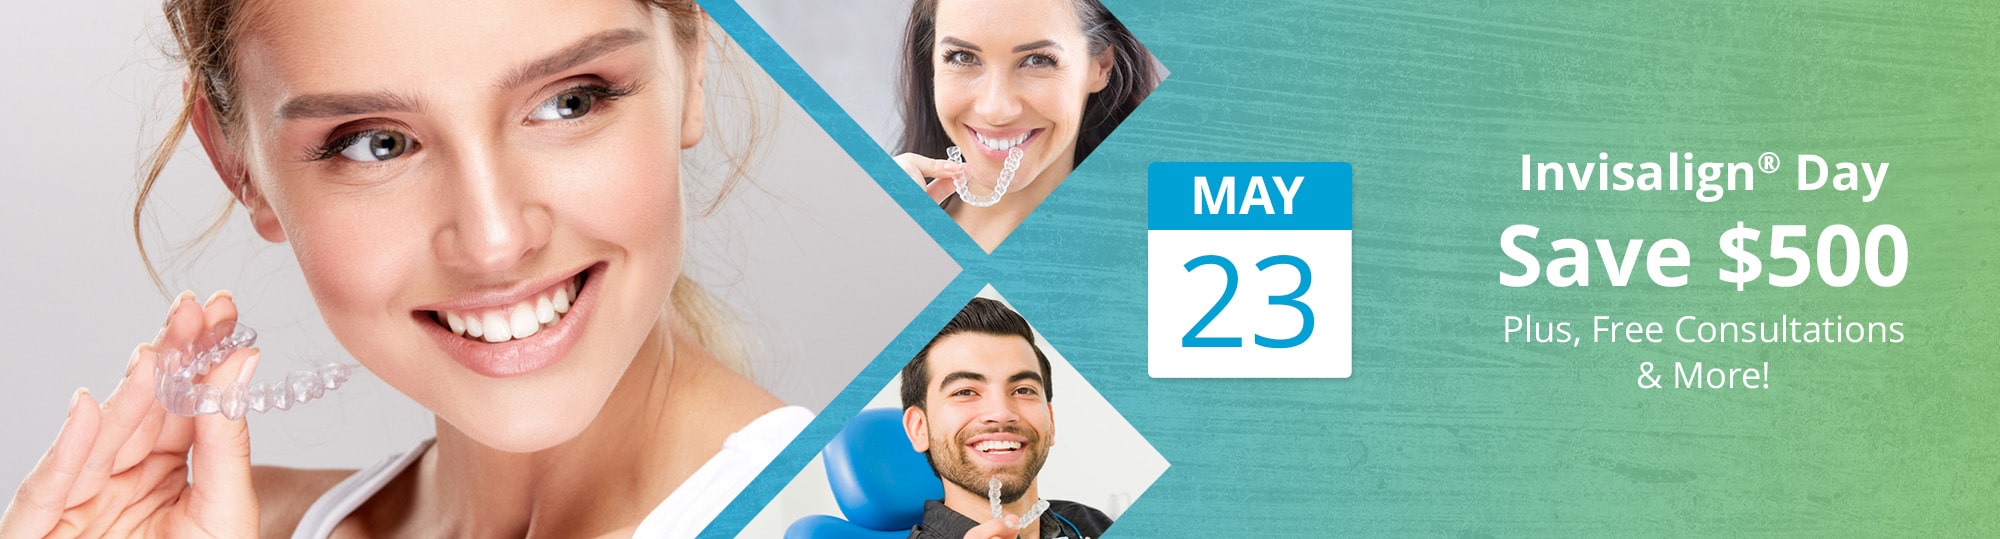 invisalign day offer may 23